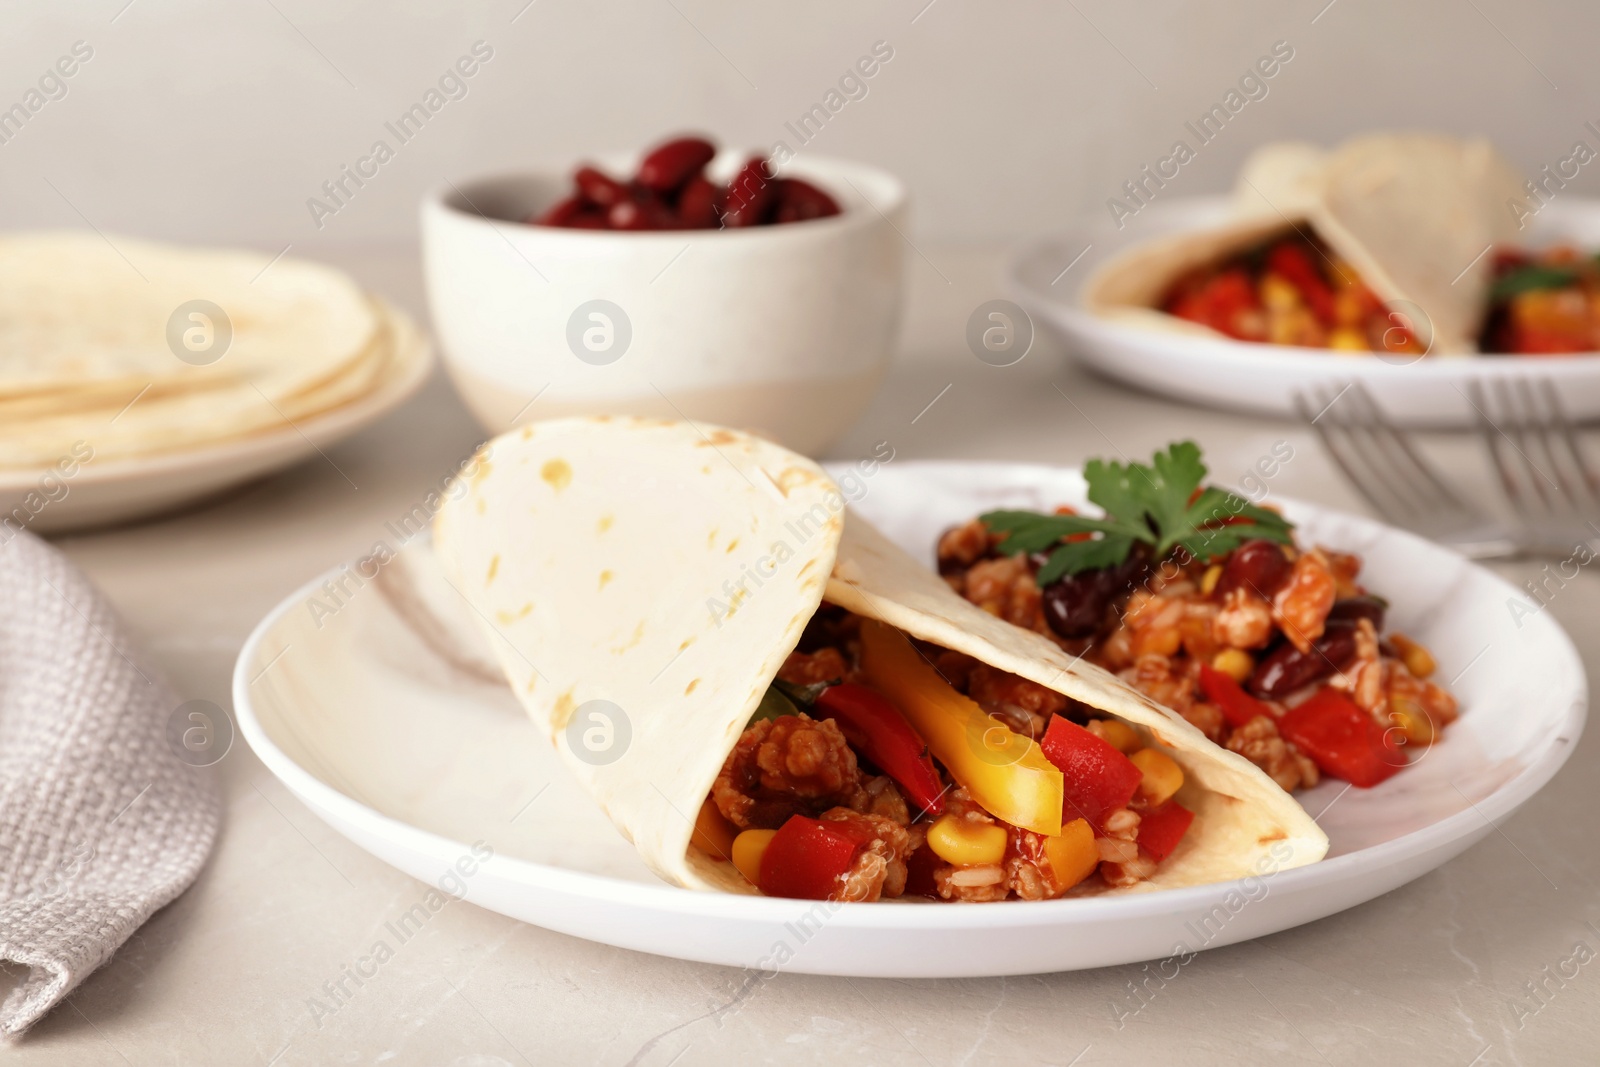 Photo of Chili con carne served with tortilla on table